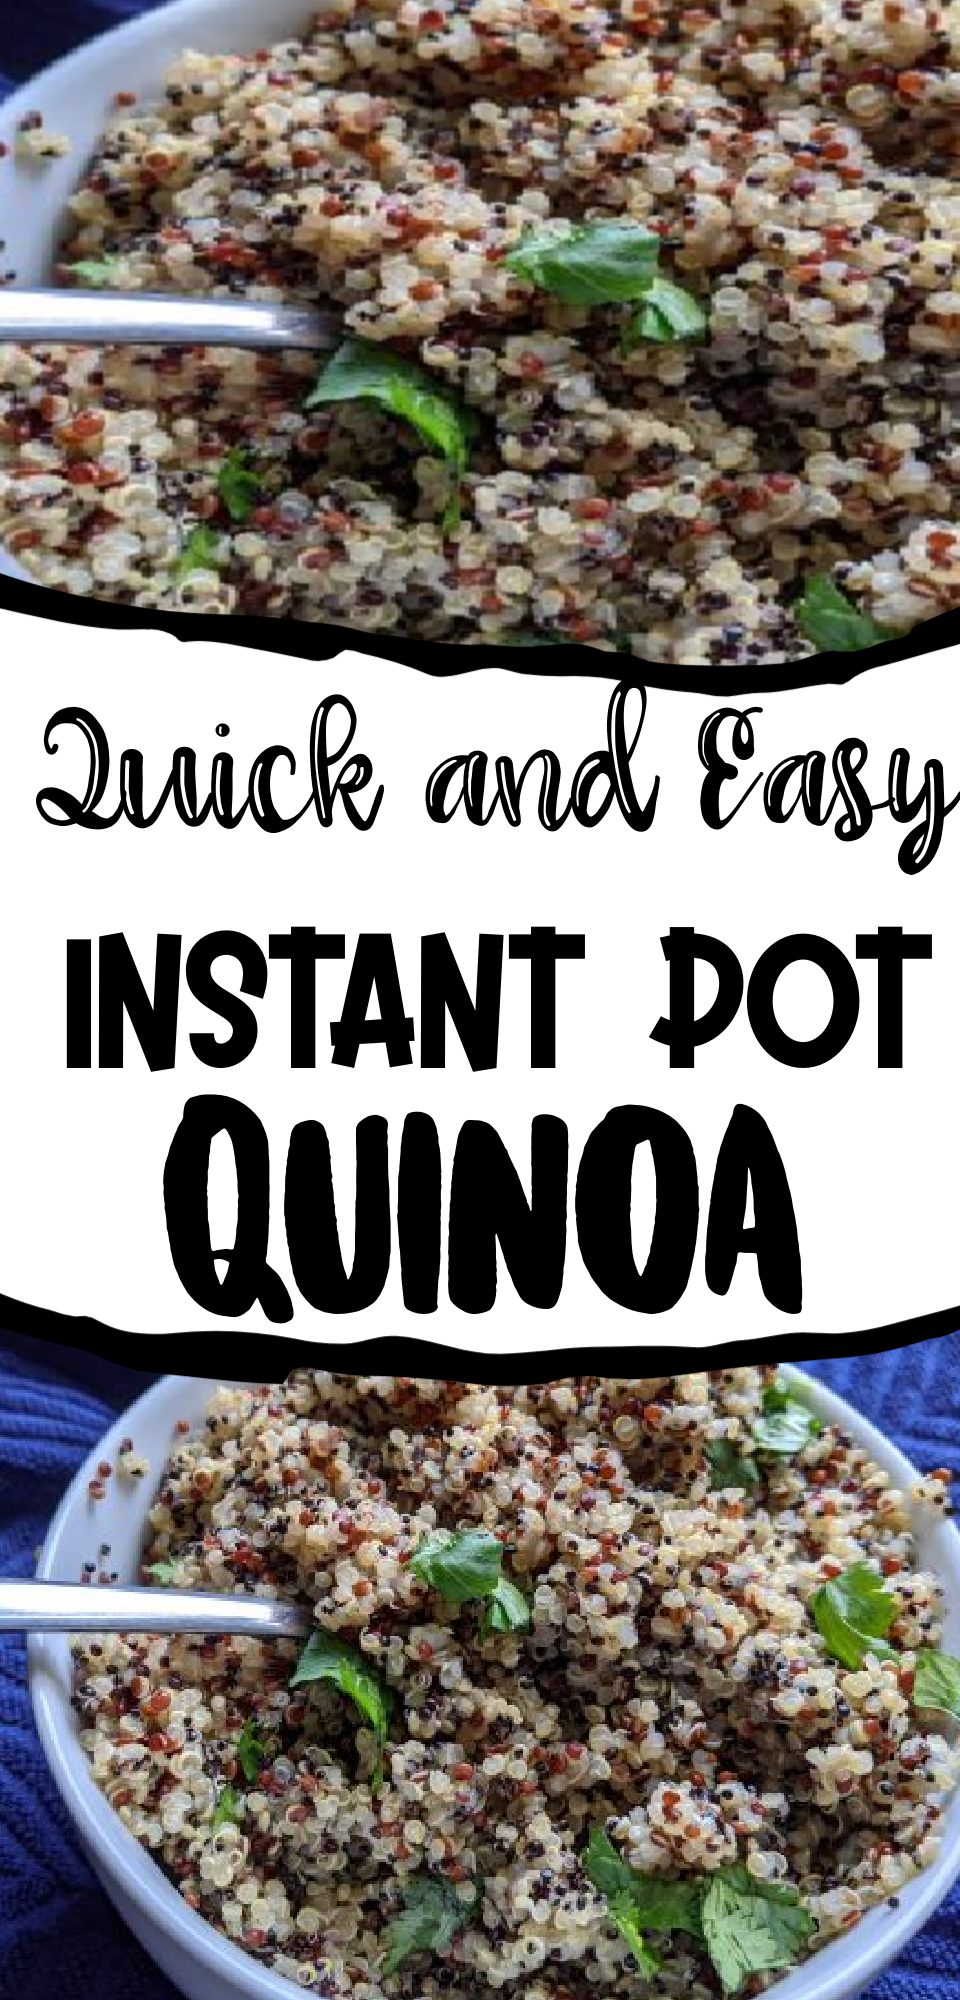 This is a quick and easy Instant Pot Quinoa recipe. Quinoa is a wonderful side dish and substitutes for rice, and it's never been easier than when made in the Instant Pot!